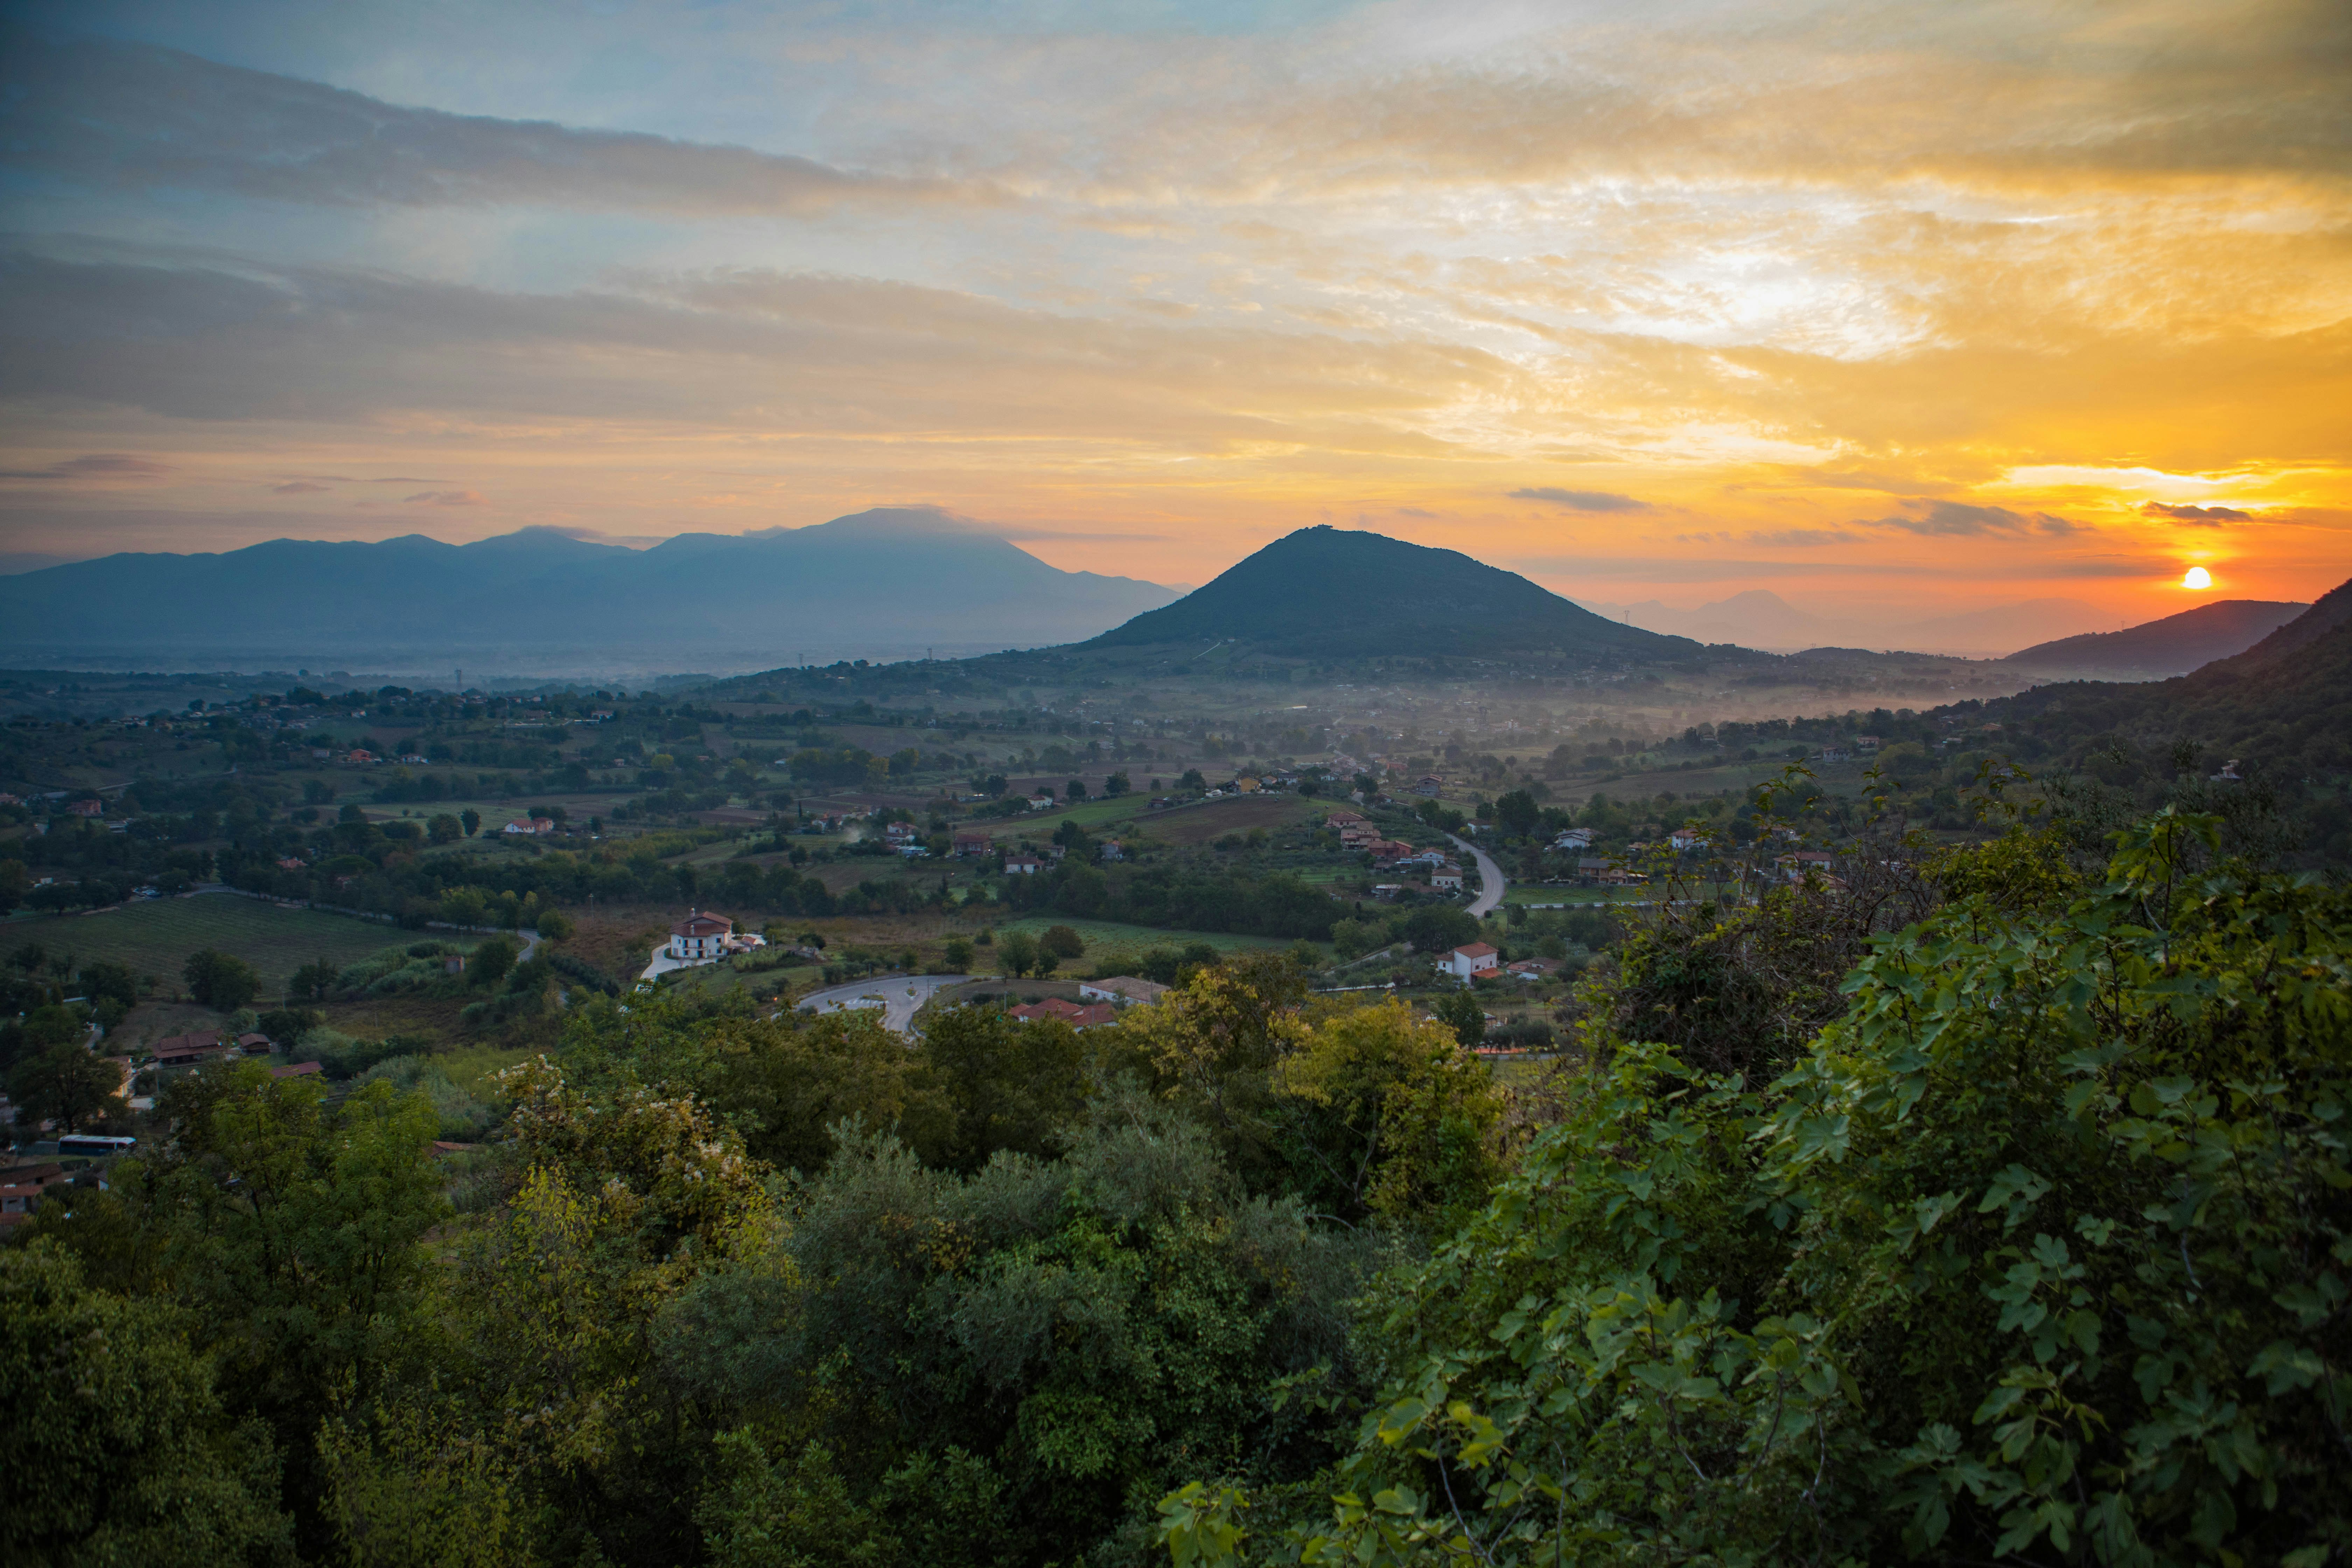 The sun rises over Pico, Italy with lush green foliage in the foreground, rolling hills dotted with Tuscan clay houses in the midground, and the striking blue mass of Pico mountain in the background surrounded by oranges and pinks in the sky. In the far distance is a blue, shadowed range of mountains separate from Pico